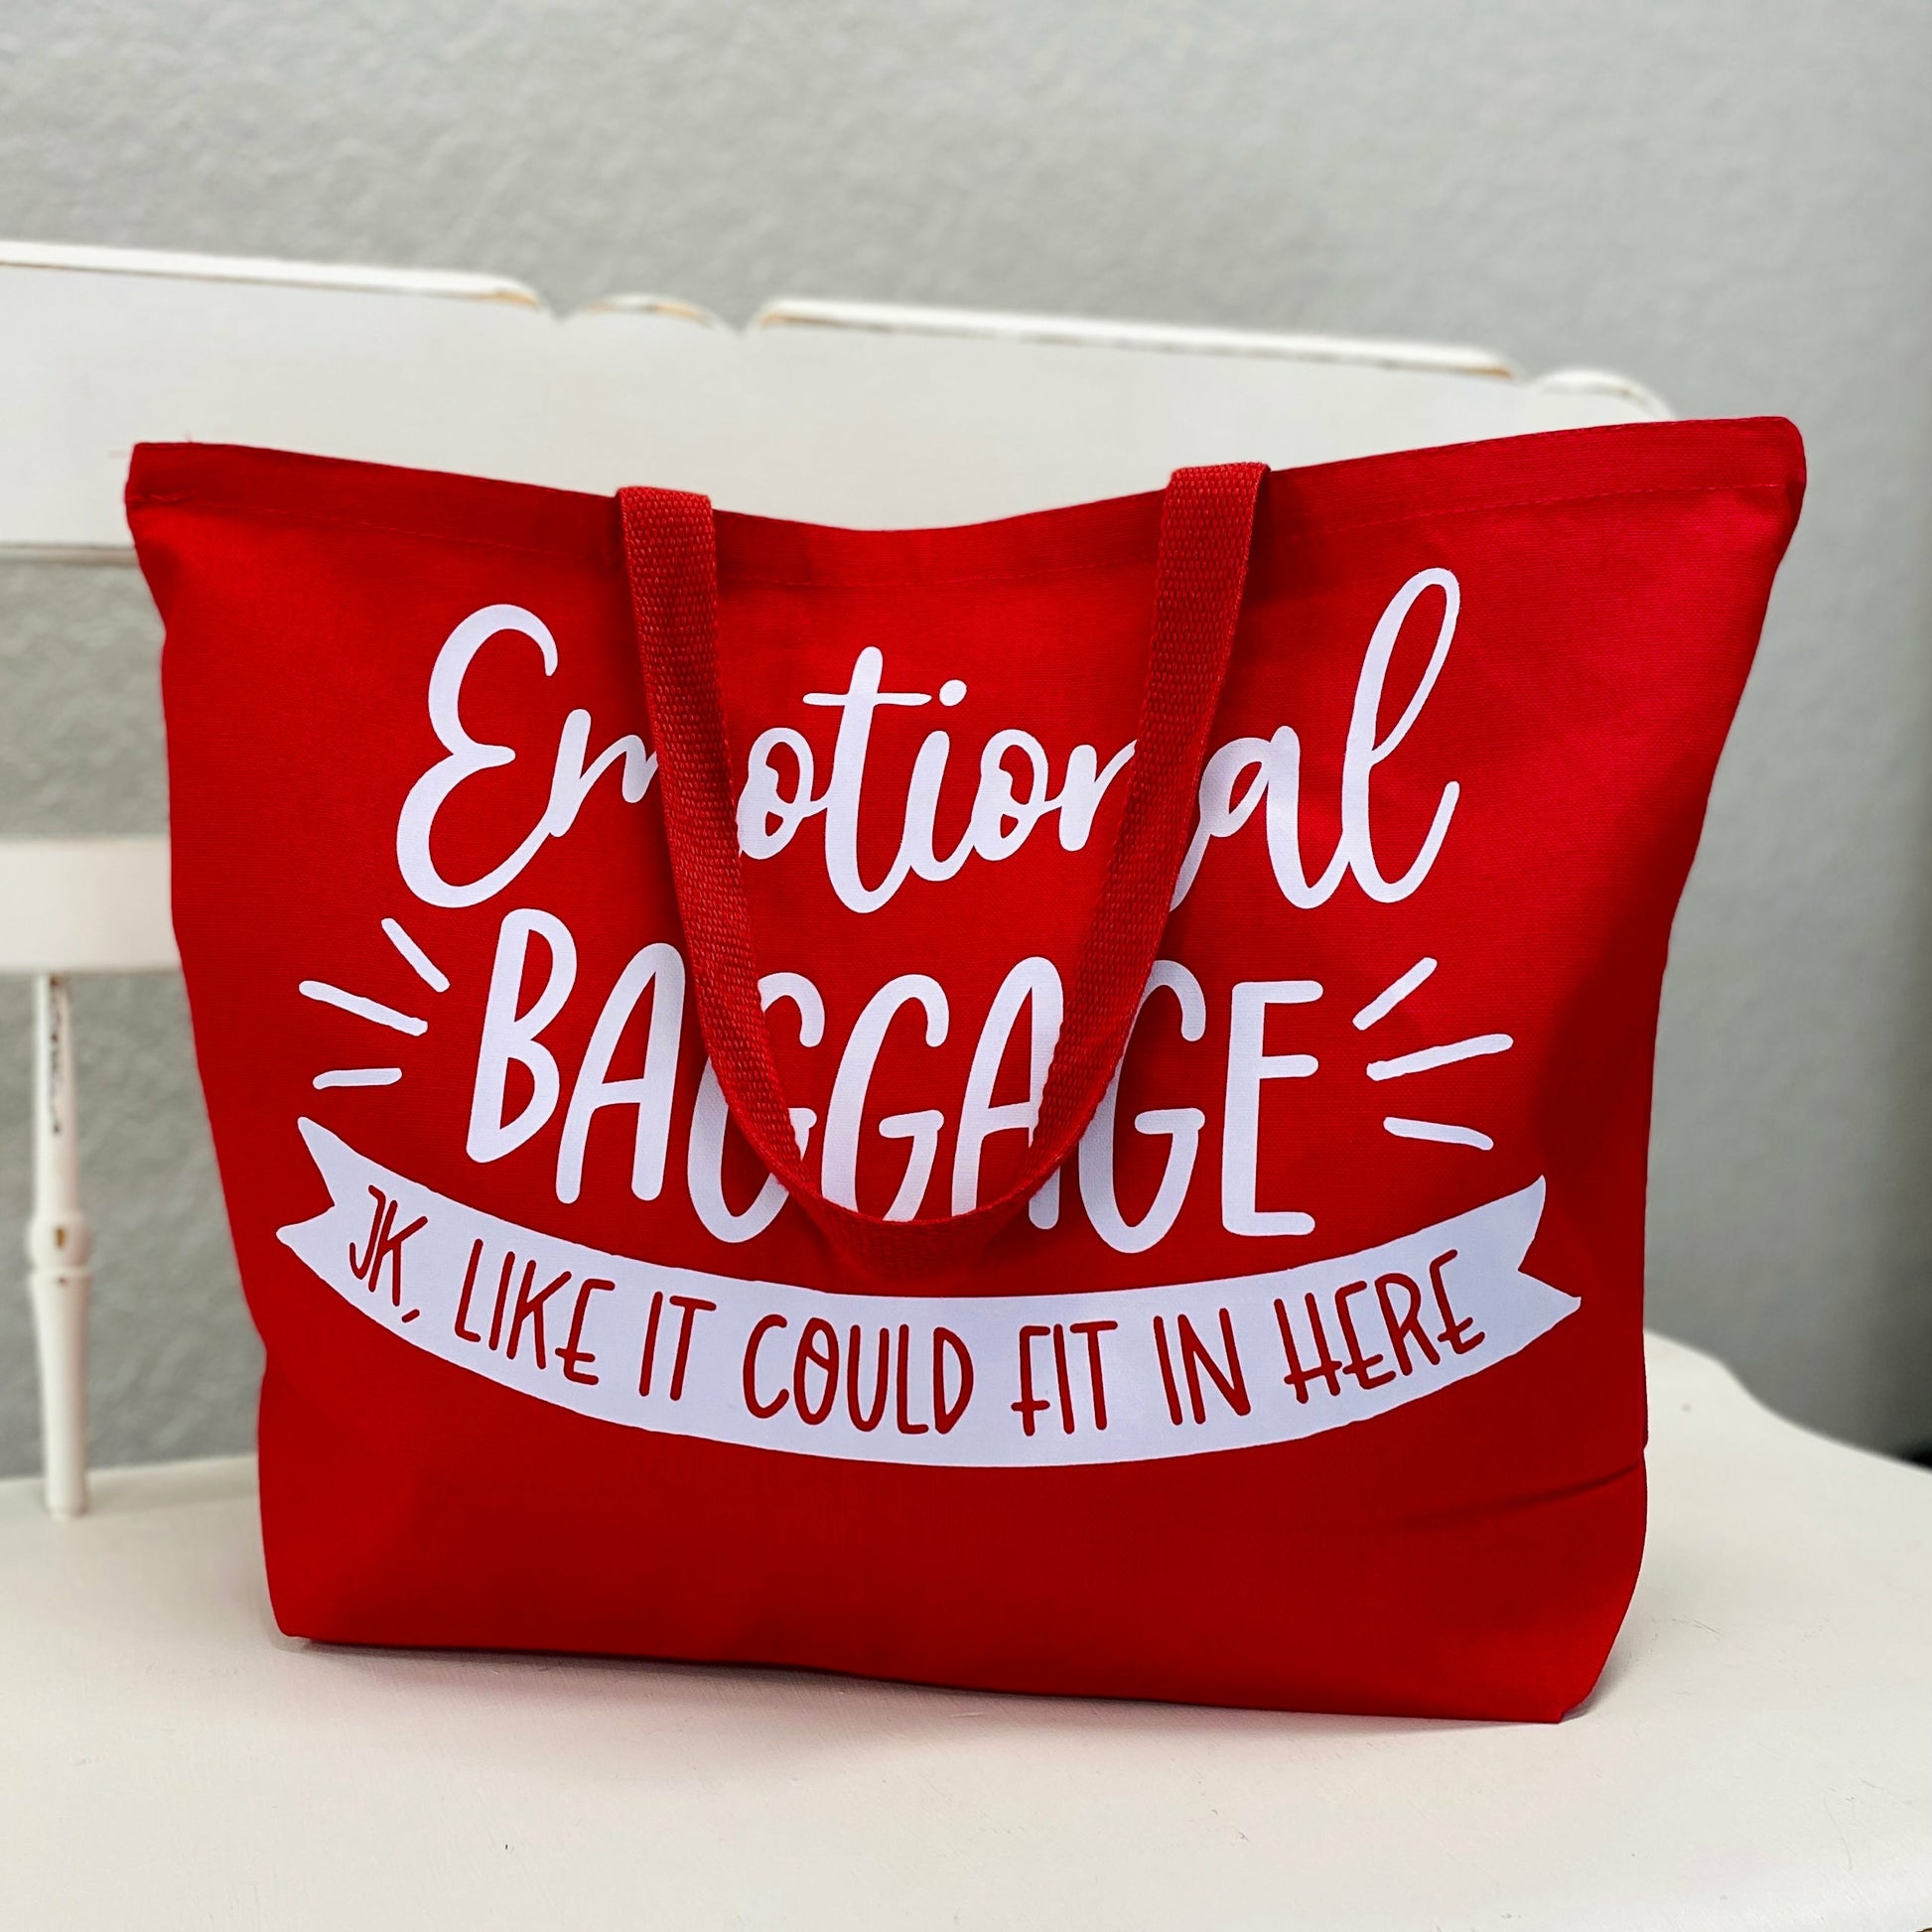 Emotional Baggage Red Bag  We all feel a little low sometimes, thankfully we've got a bag to carry snacks AND our sadness!   %100 cotton  Tea Shirt Shoppe 417-262-8828